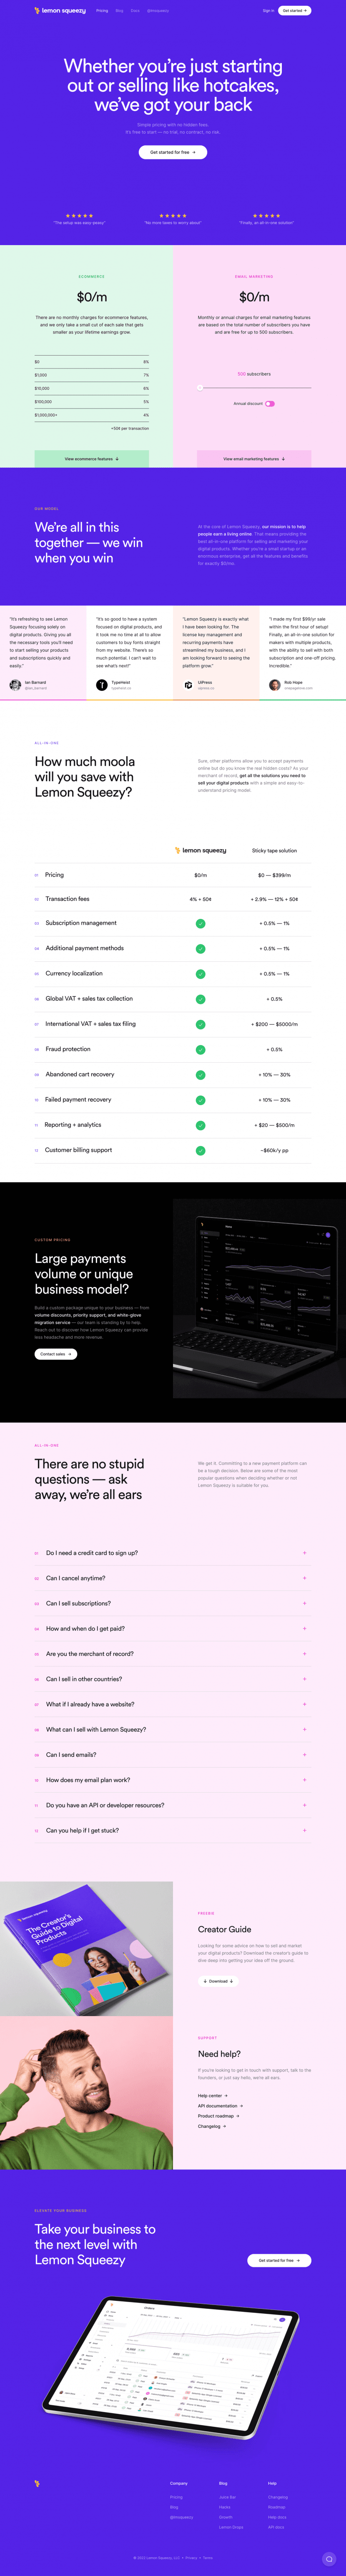 lemonsqueezy-pricing-page